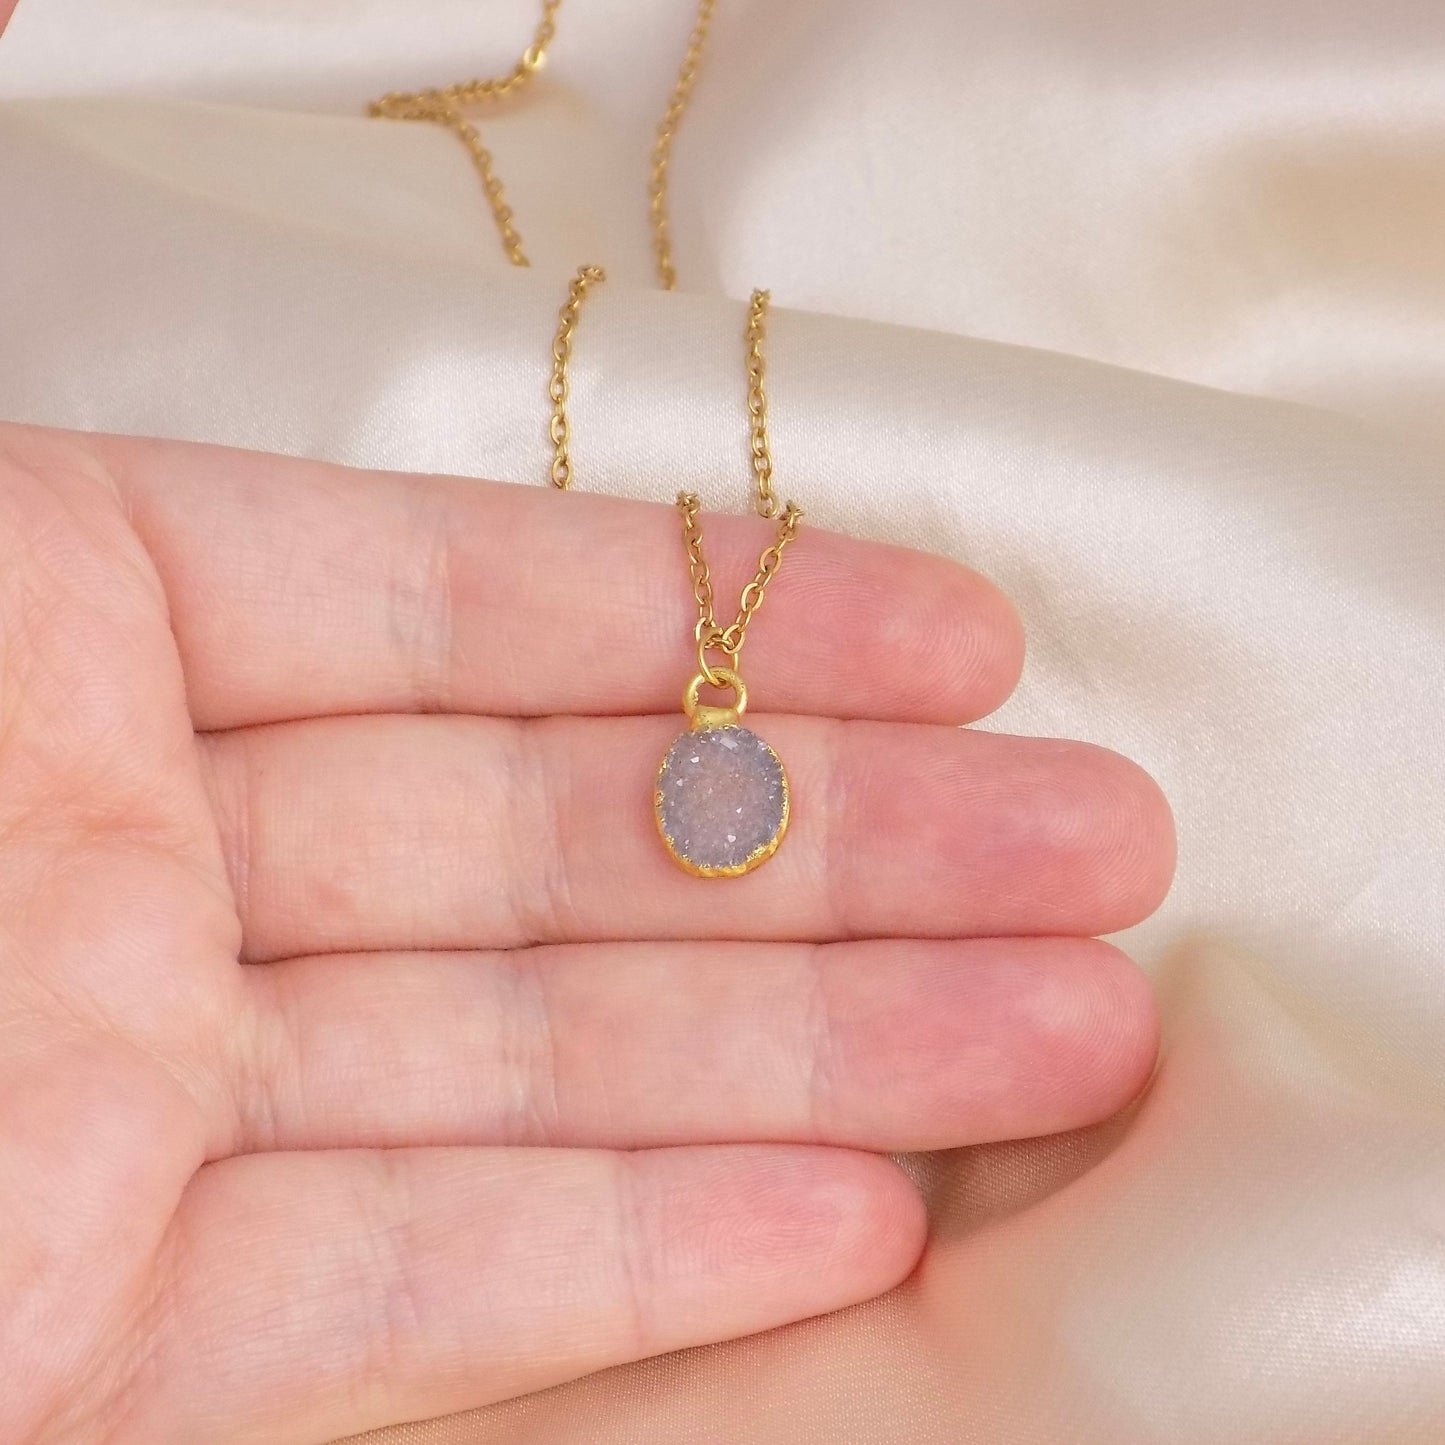 Tiny Natural Druzy Gemstone Necklace on 18K Gold Stainless Steel Chain, G14-797